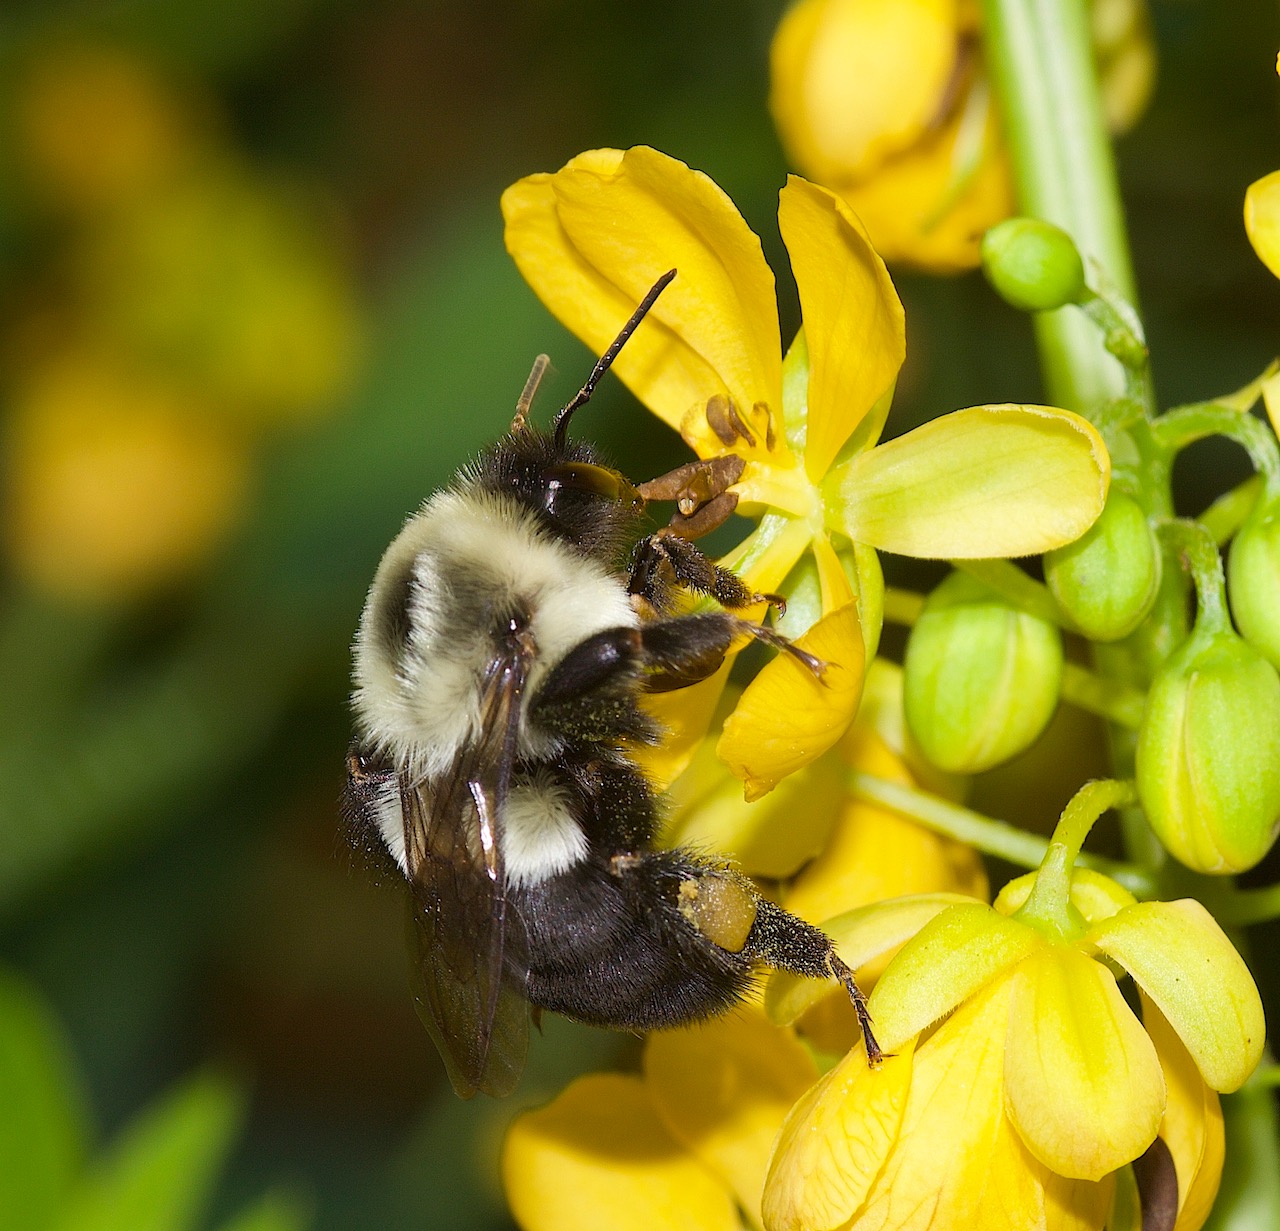 Southern Wild Senna Attracts Bumble Bees